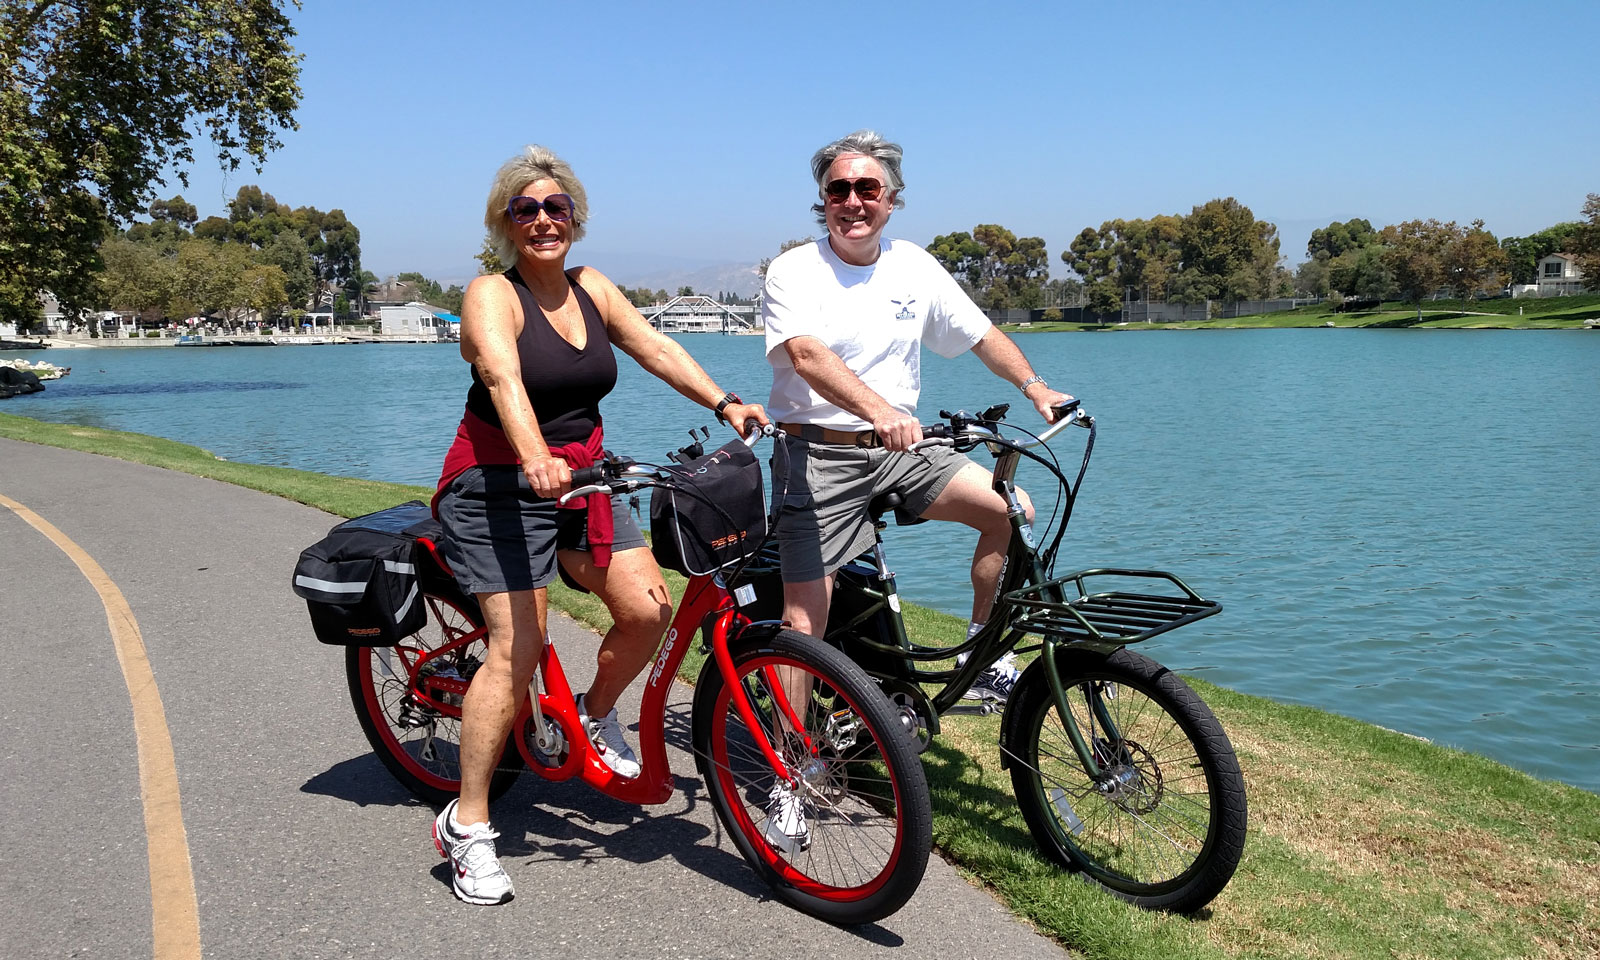 Revolutionize your ride with an electric bike